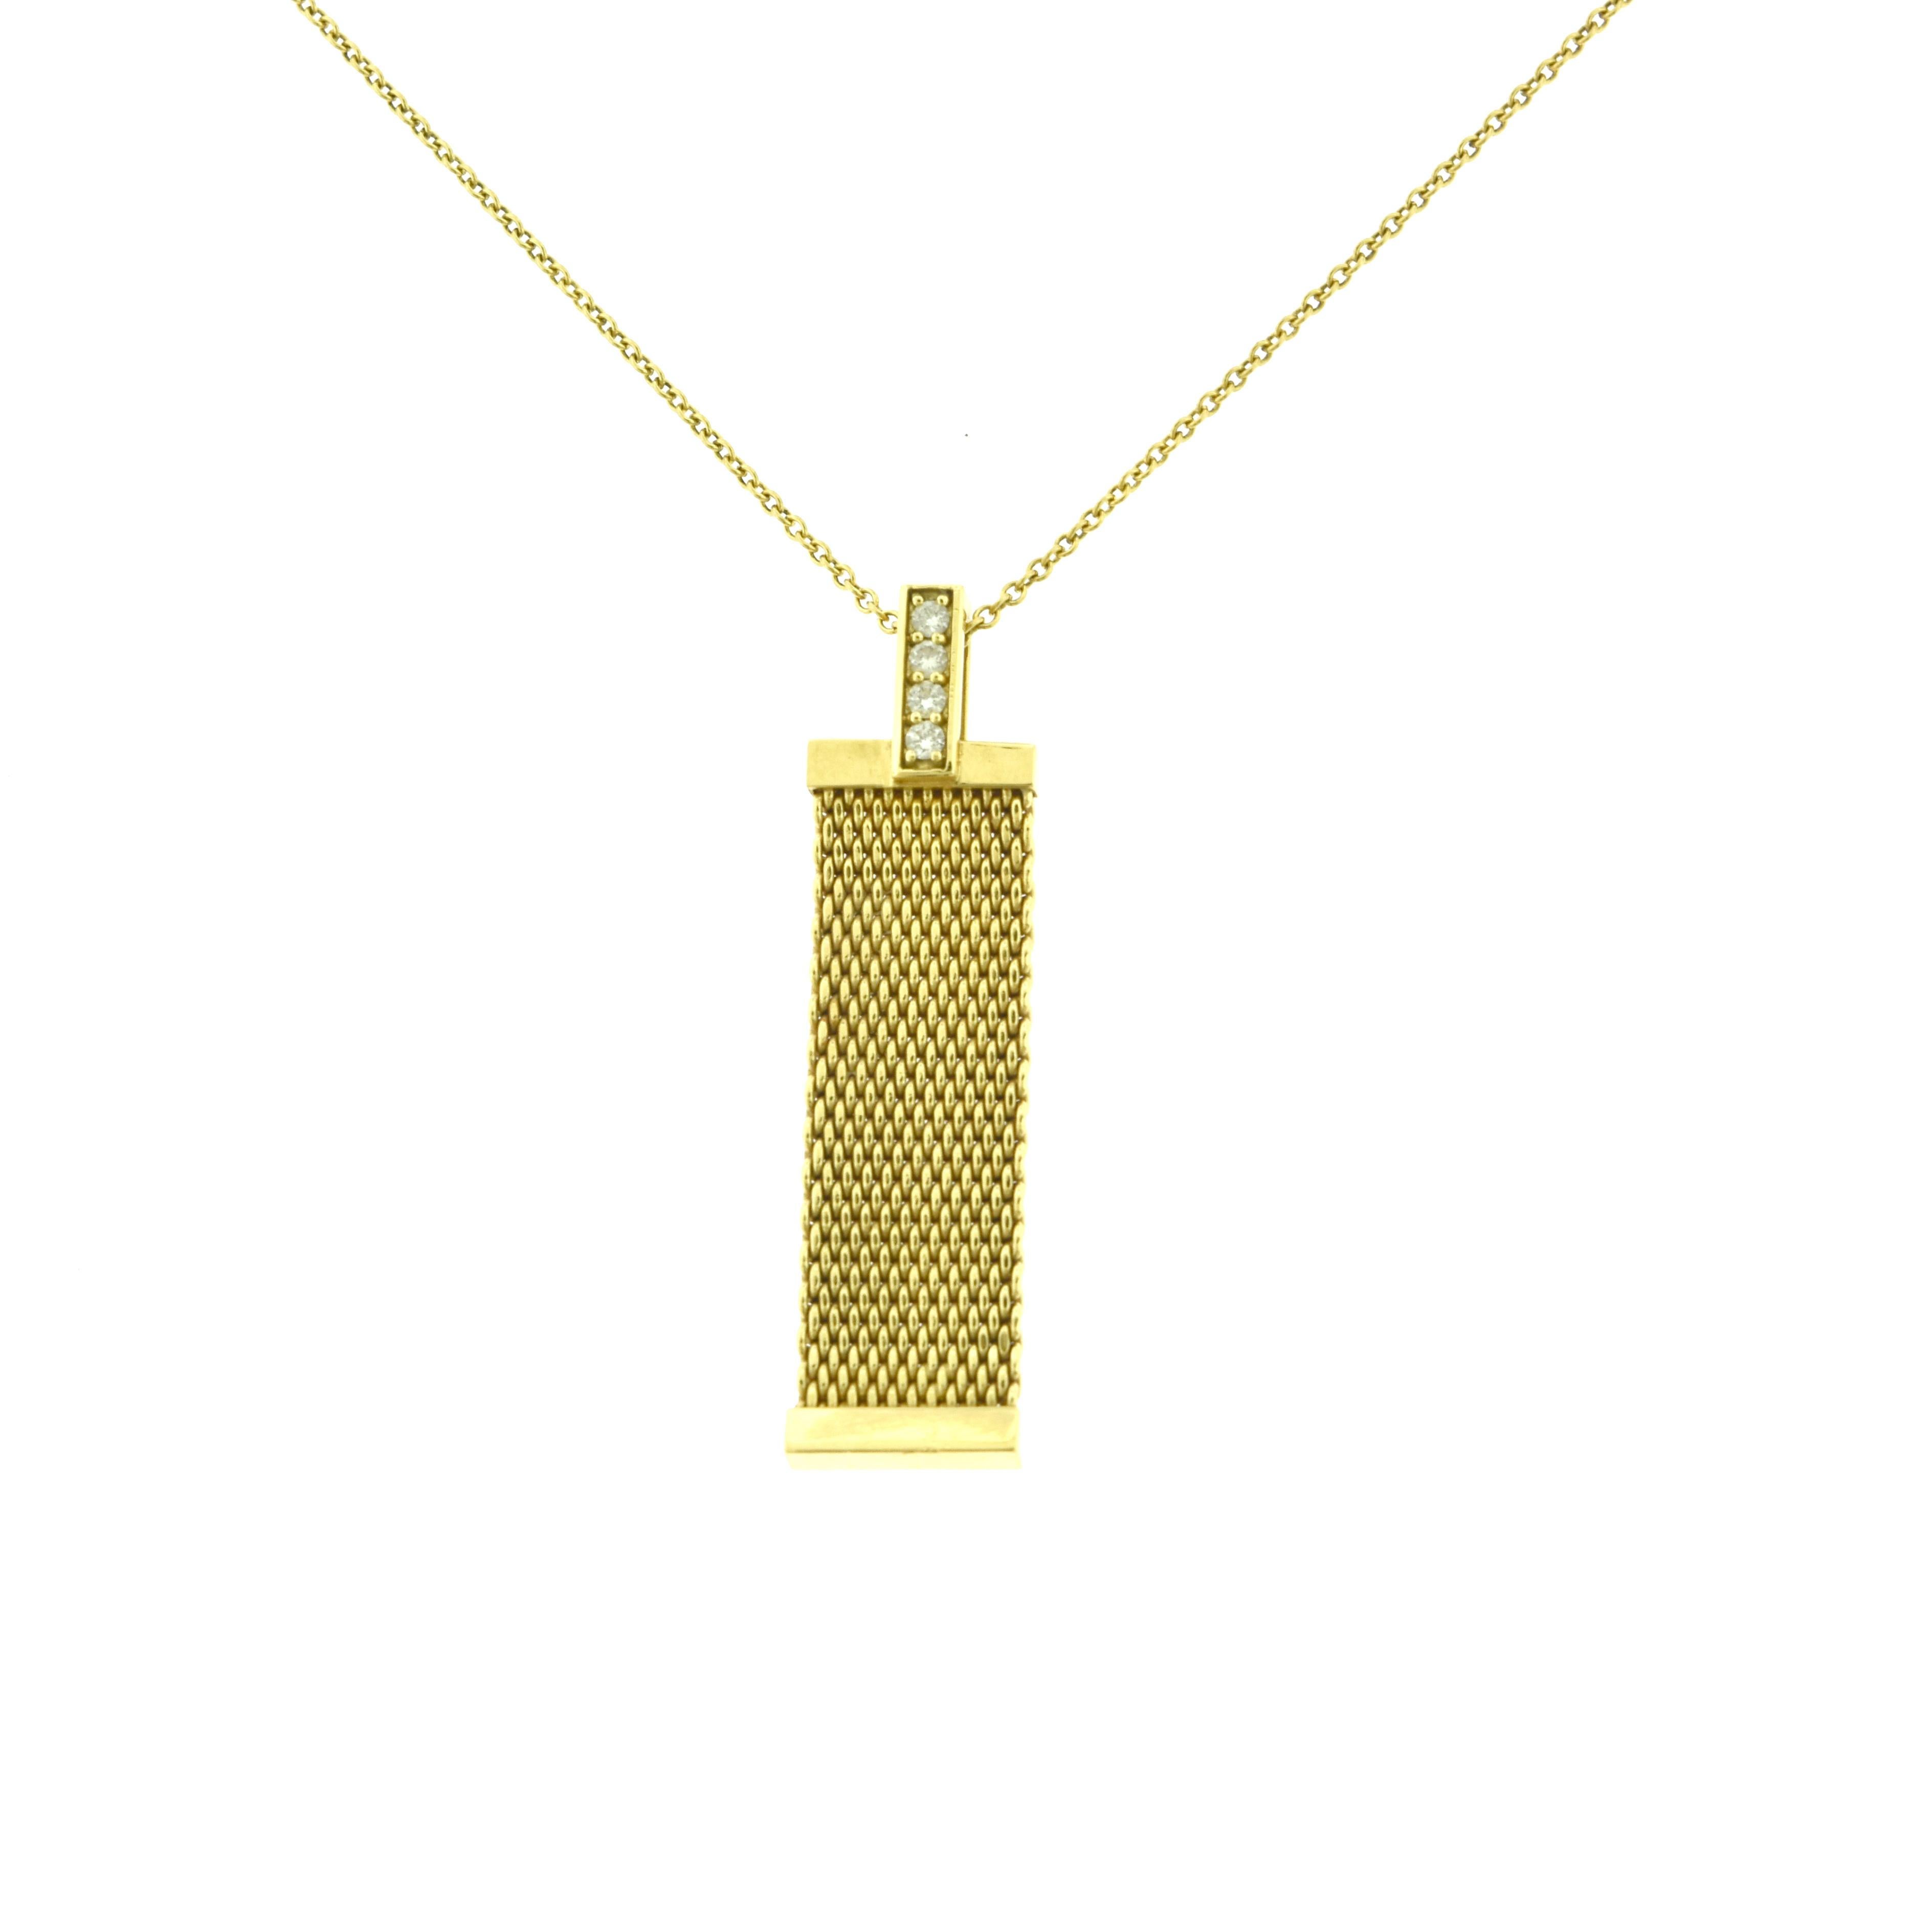 Brilliance Jewels, Miami
Questions? Call Us Anytime!
786,482,8100

Pendant Length: Approx. 1.1 inches 

Designer: Tiffany & Co.

Collection: Somerset

Style: Pendant 

Metal: Yellow Gold 

Stones: 4 Round Brilliant Diamonds 

Metal Purity: